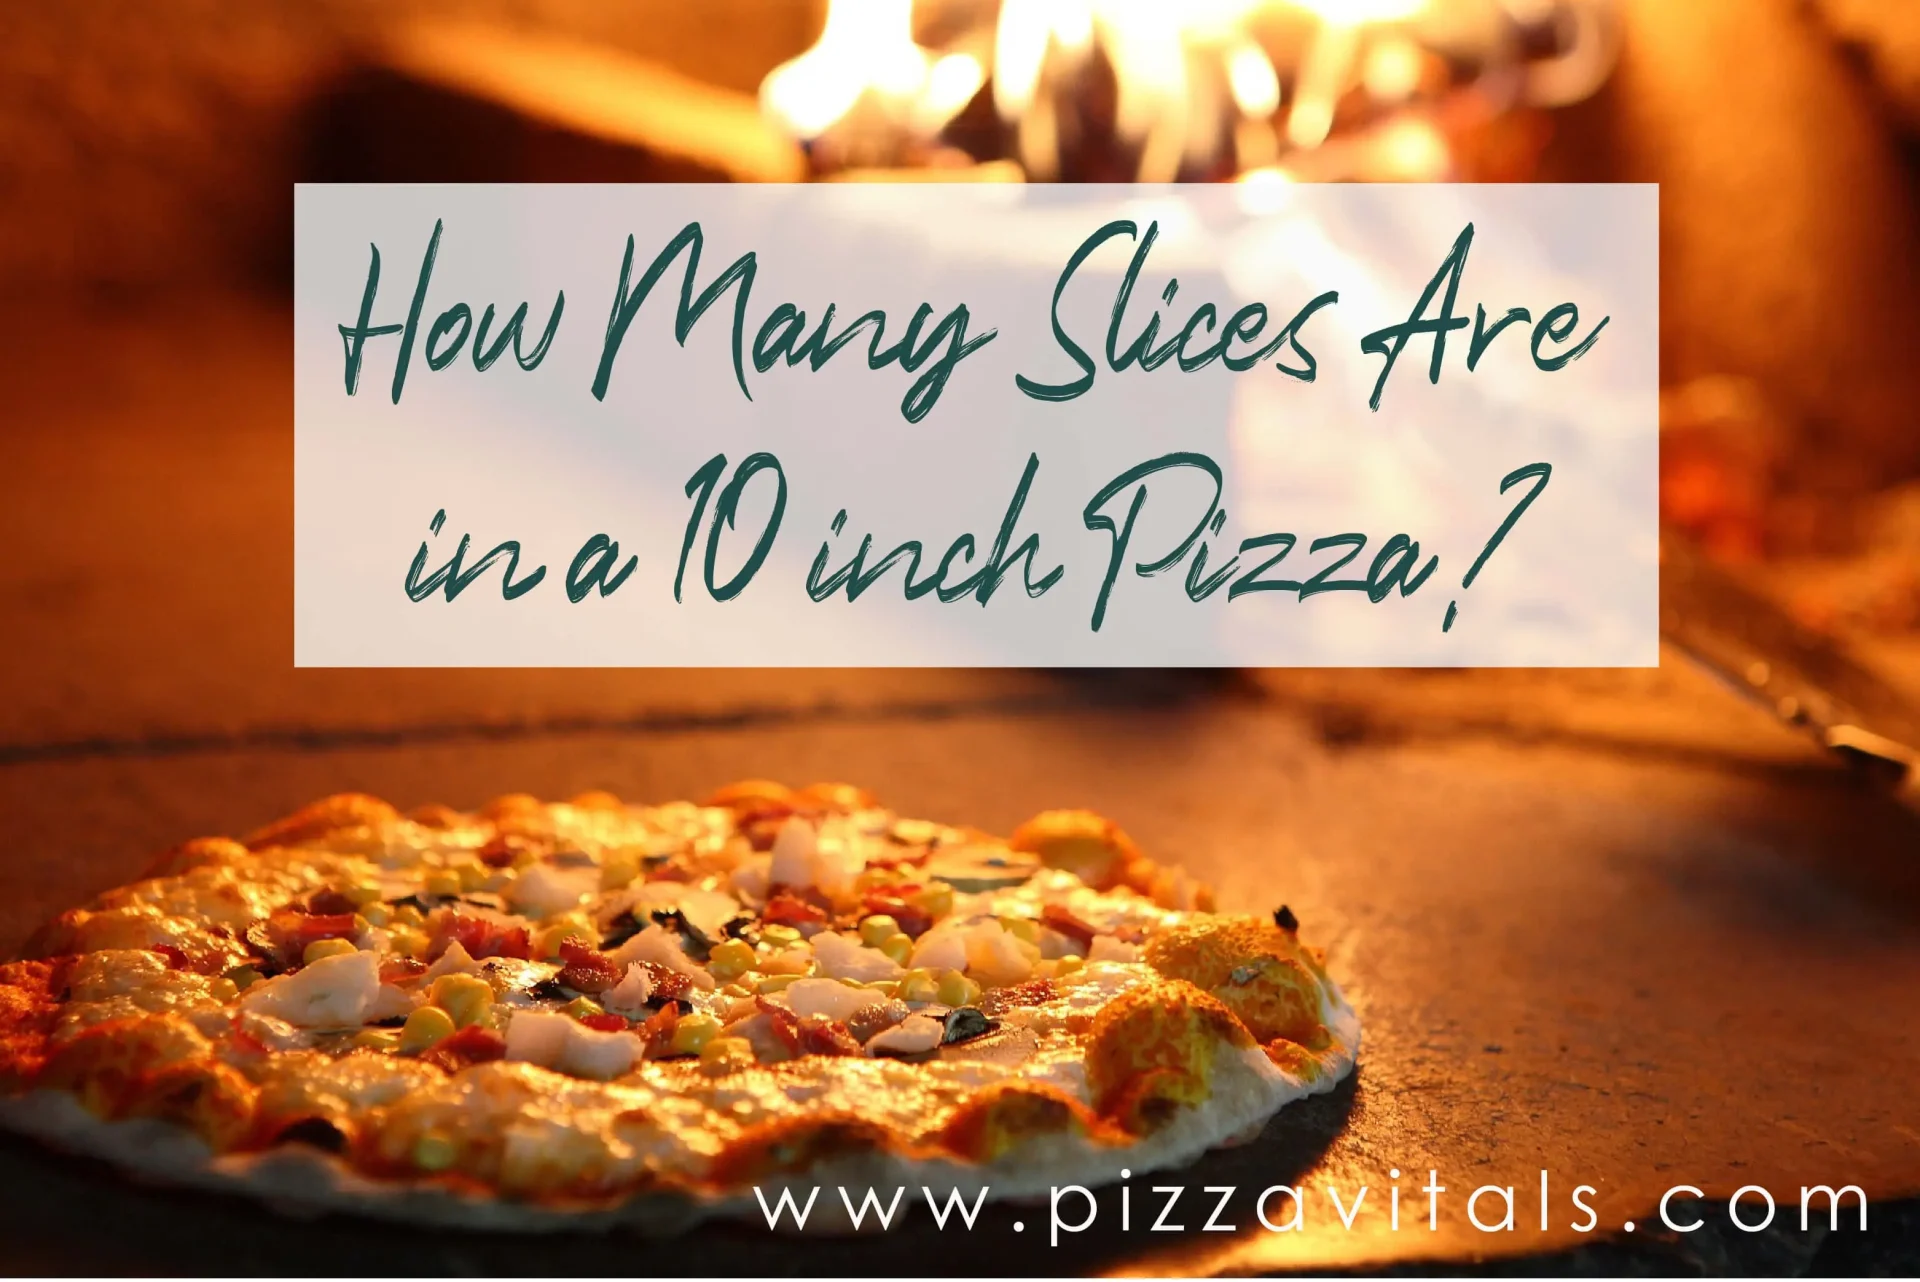 The Pizza slice mystery: How Many Slices Are in a 10 inch Pizza?